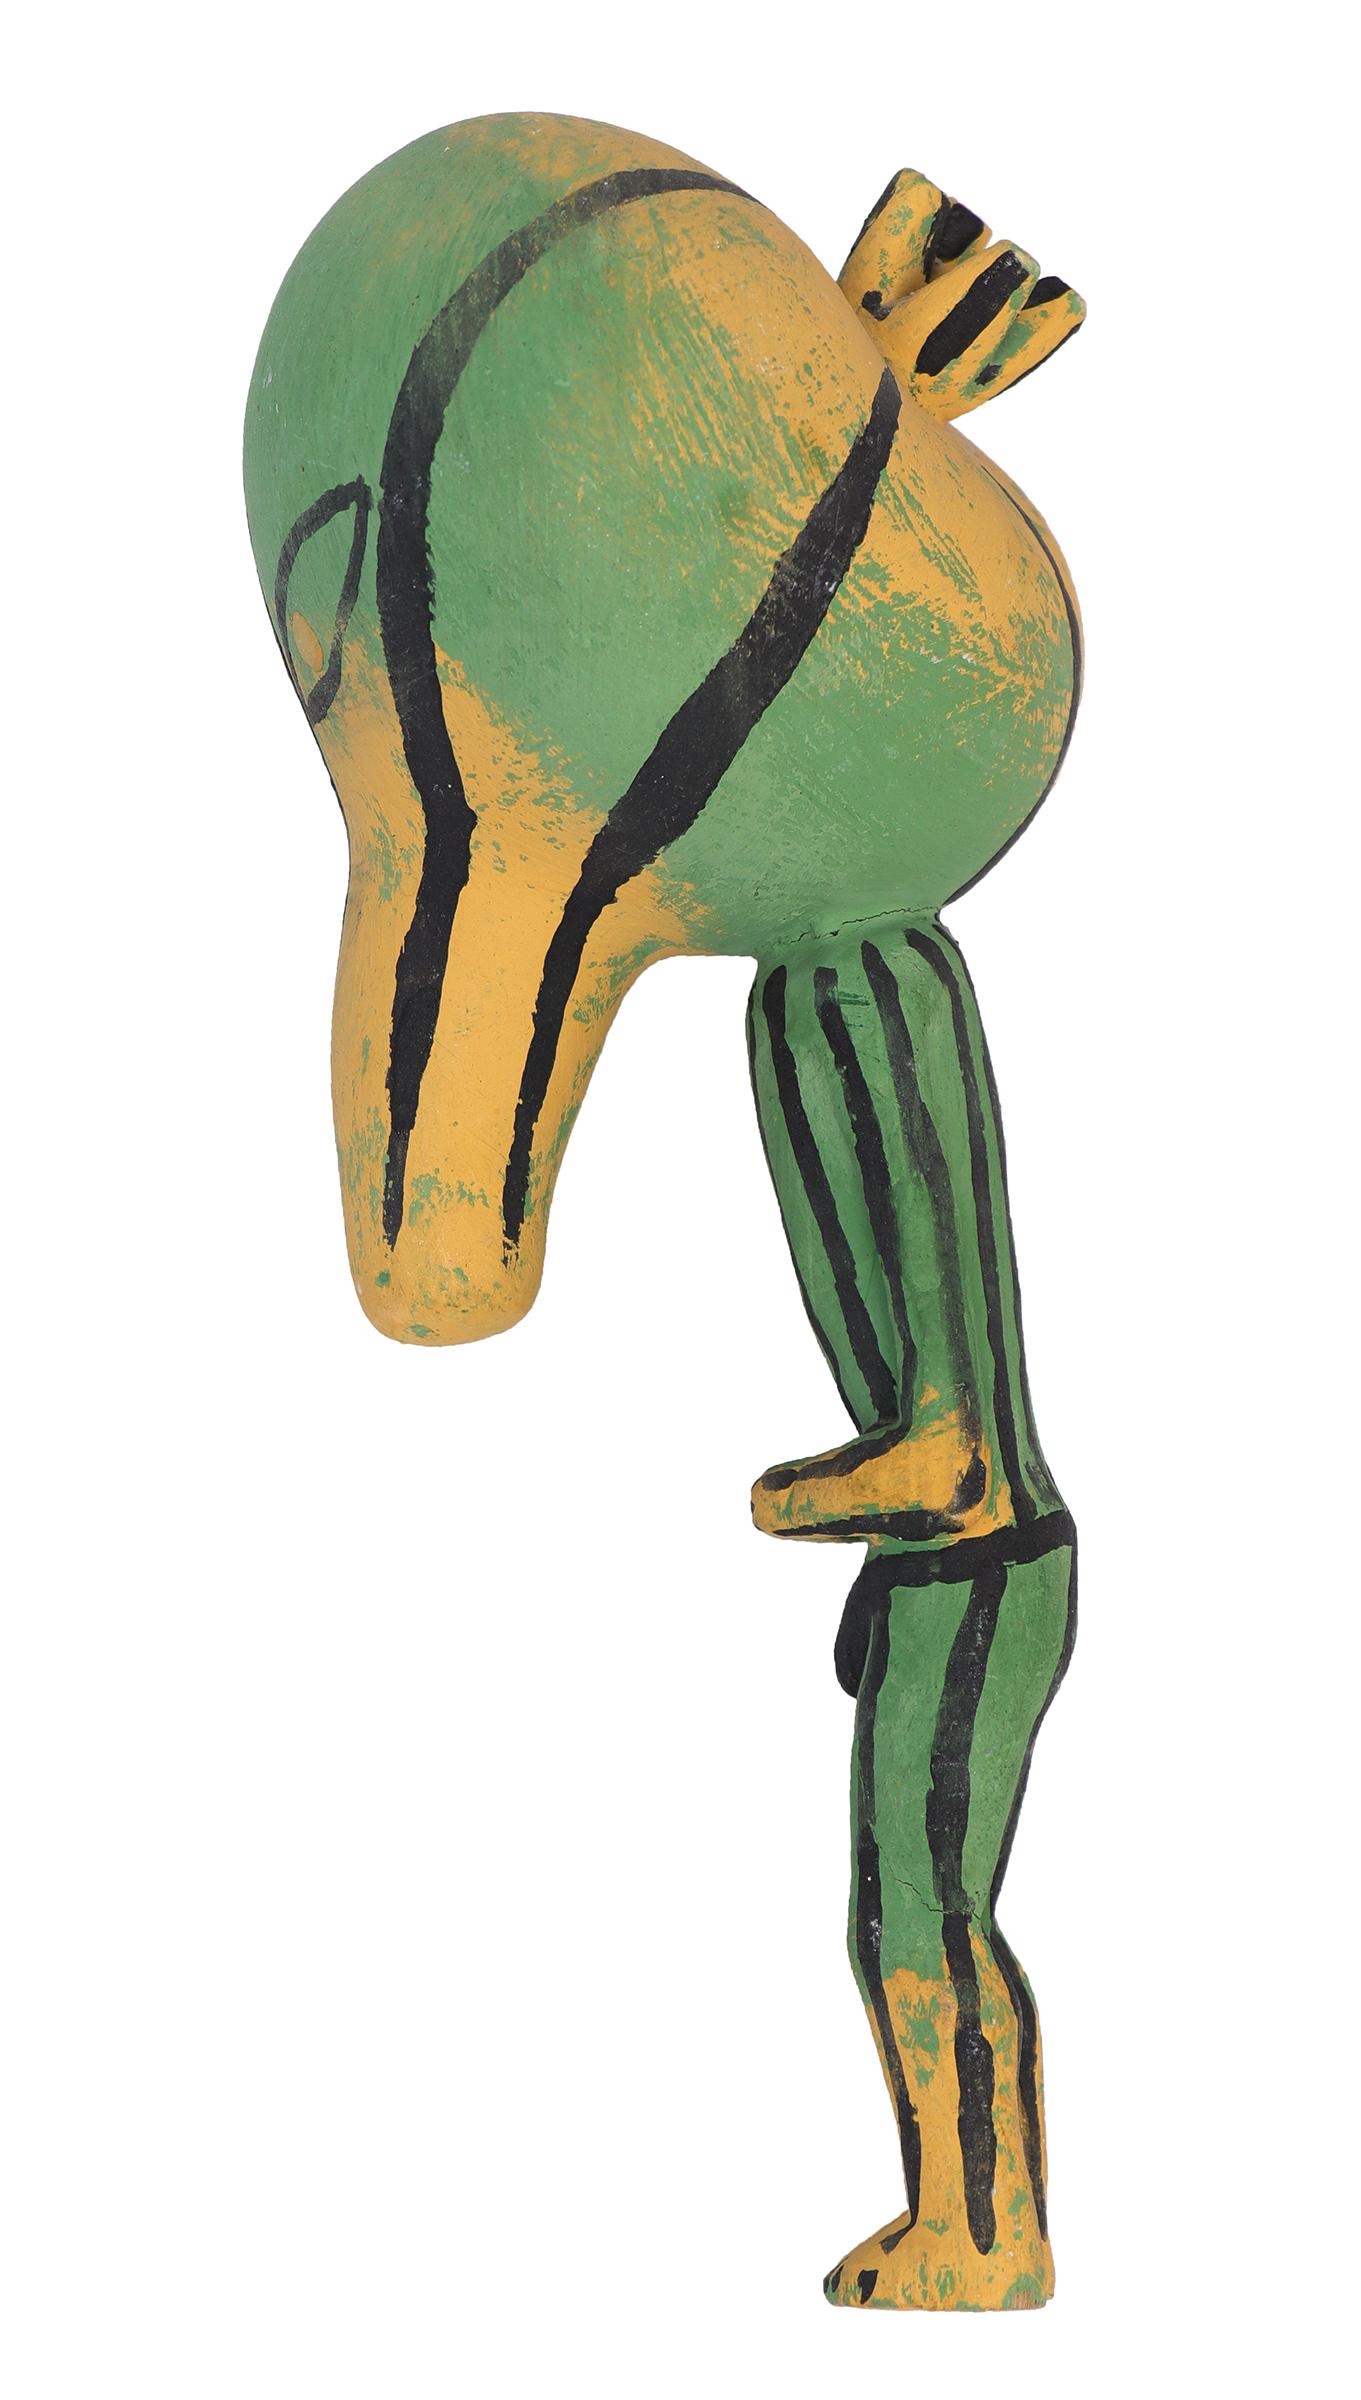 A traditional Patun (Squash) Katchina/Rattle created by a member of the Hopi (Pueblo) tribe circa 1940. This rattle is made of wood and painted with yellow, green, and black vegetal paints. Dimensions measure 10 x 4 ½ inches.

Custom display stand